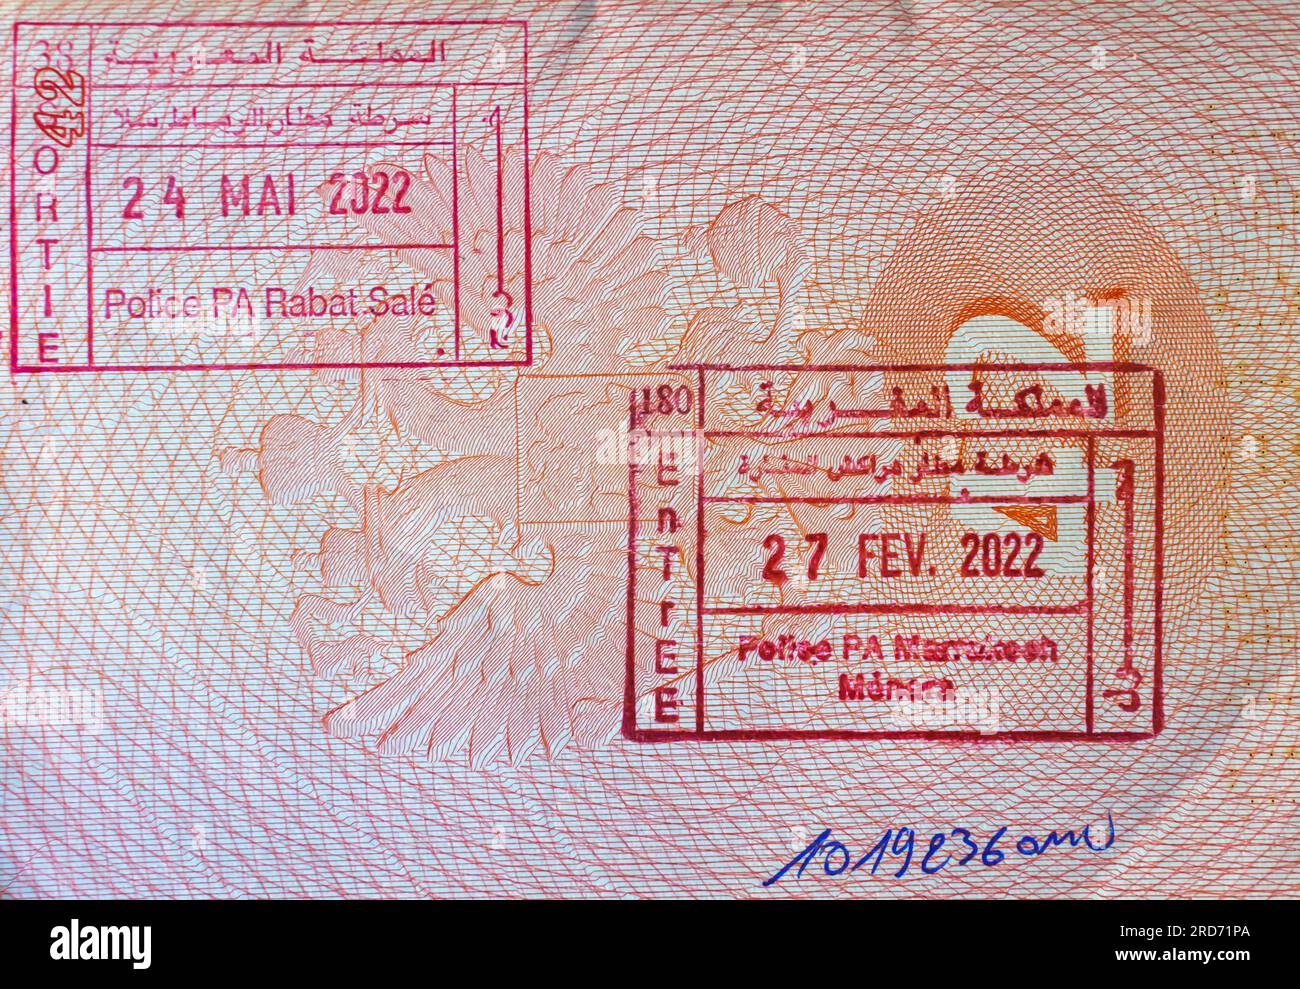 Moroccan border crossing stamps.  Marrakech-Menara Airport border  entry point in an open passport. Rabat Sale exit stamp Morocco Stock Photo